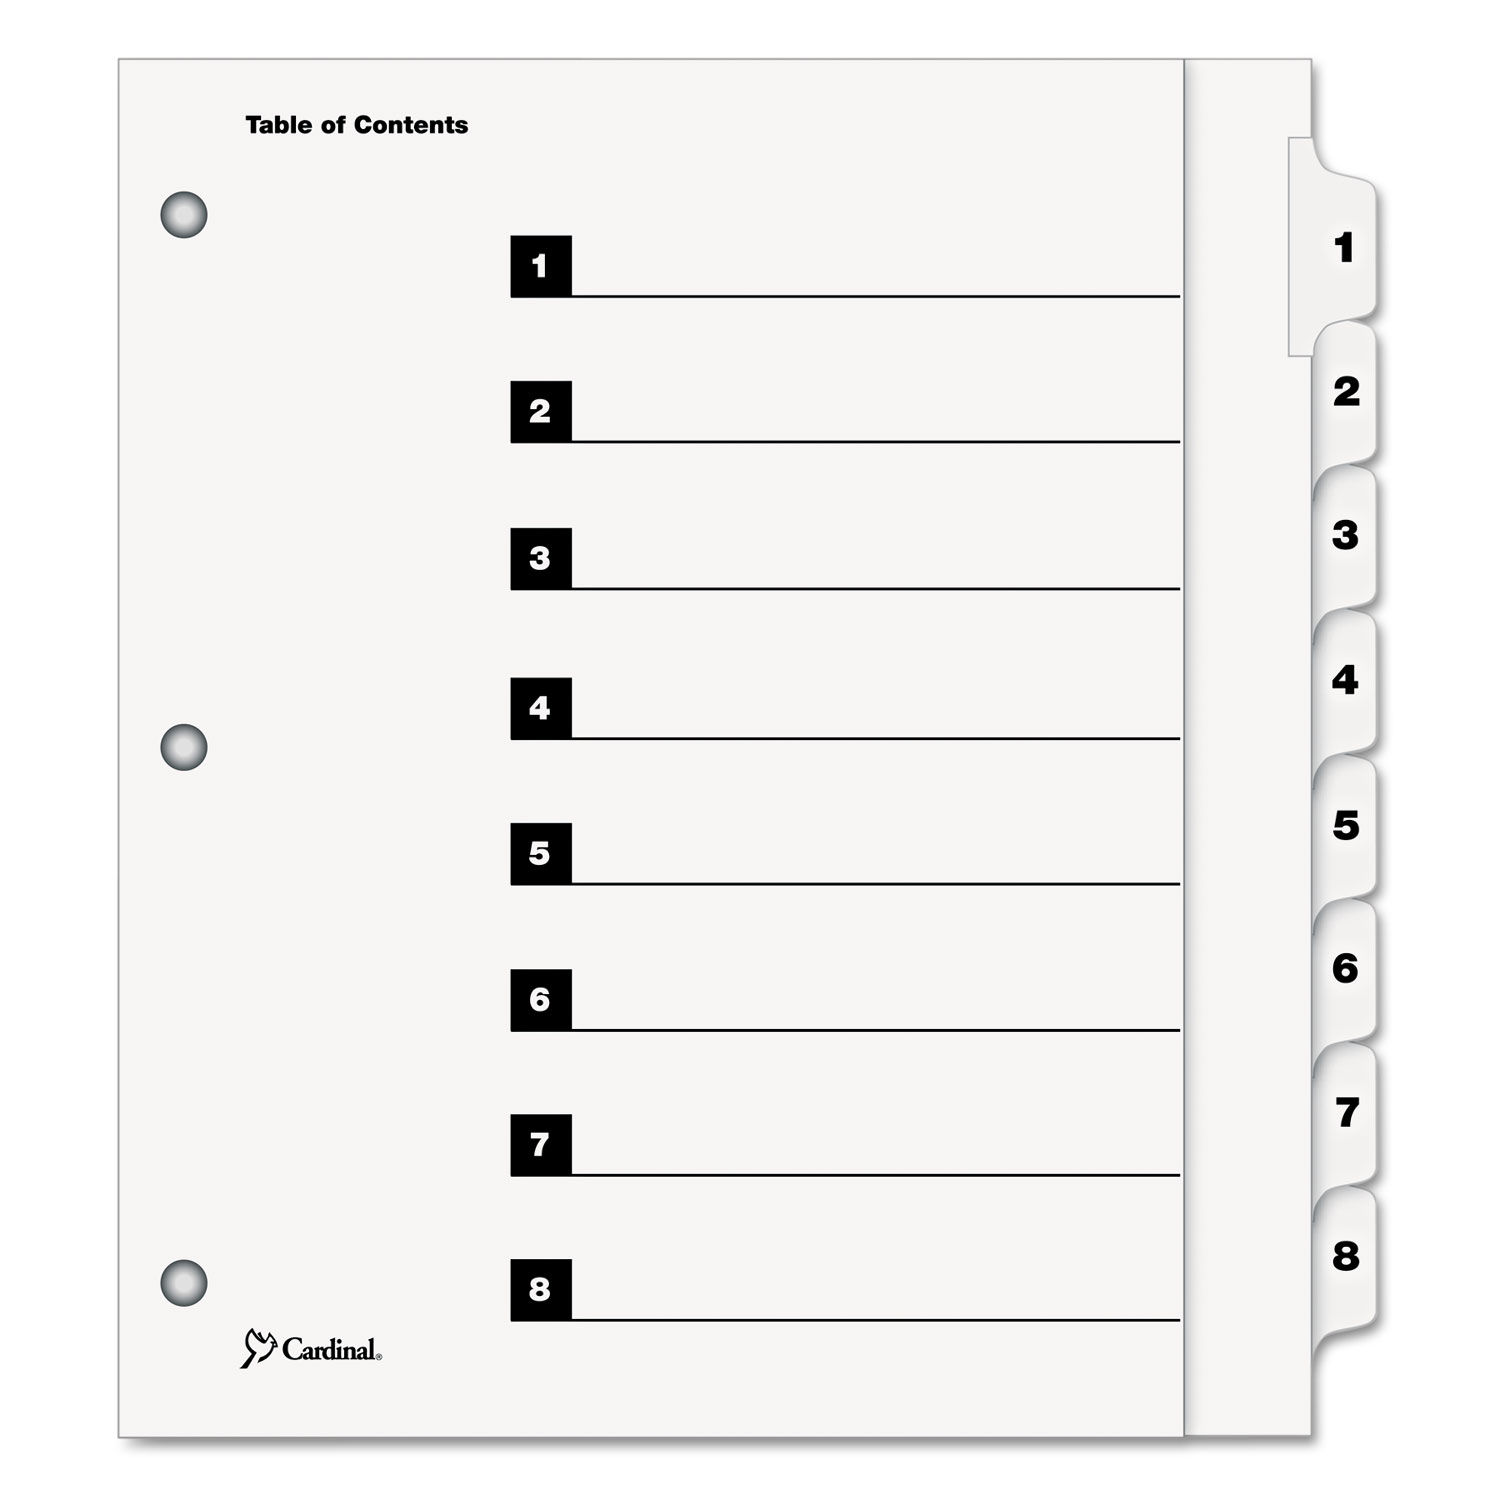  Cardinal 61813 OneStep Extra Wide Printable Table of Contents and Dividers, 8-Tab, 1 to 8, 11.25 x 9.75, White, 1 Set (CRD61813) 